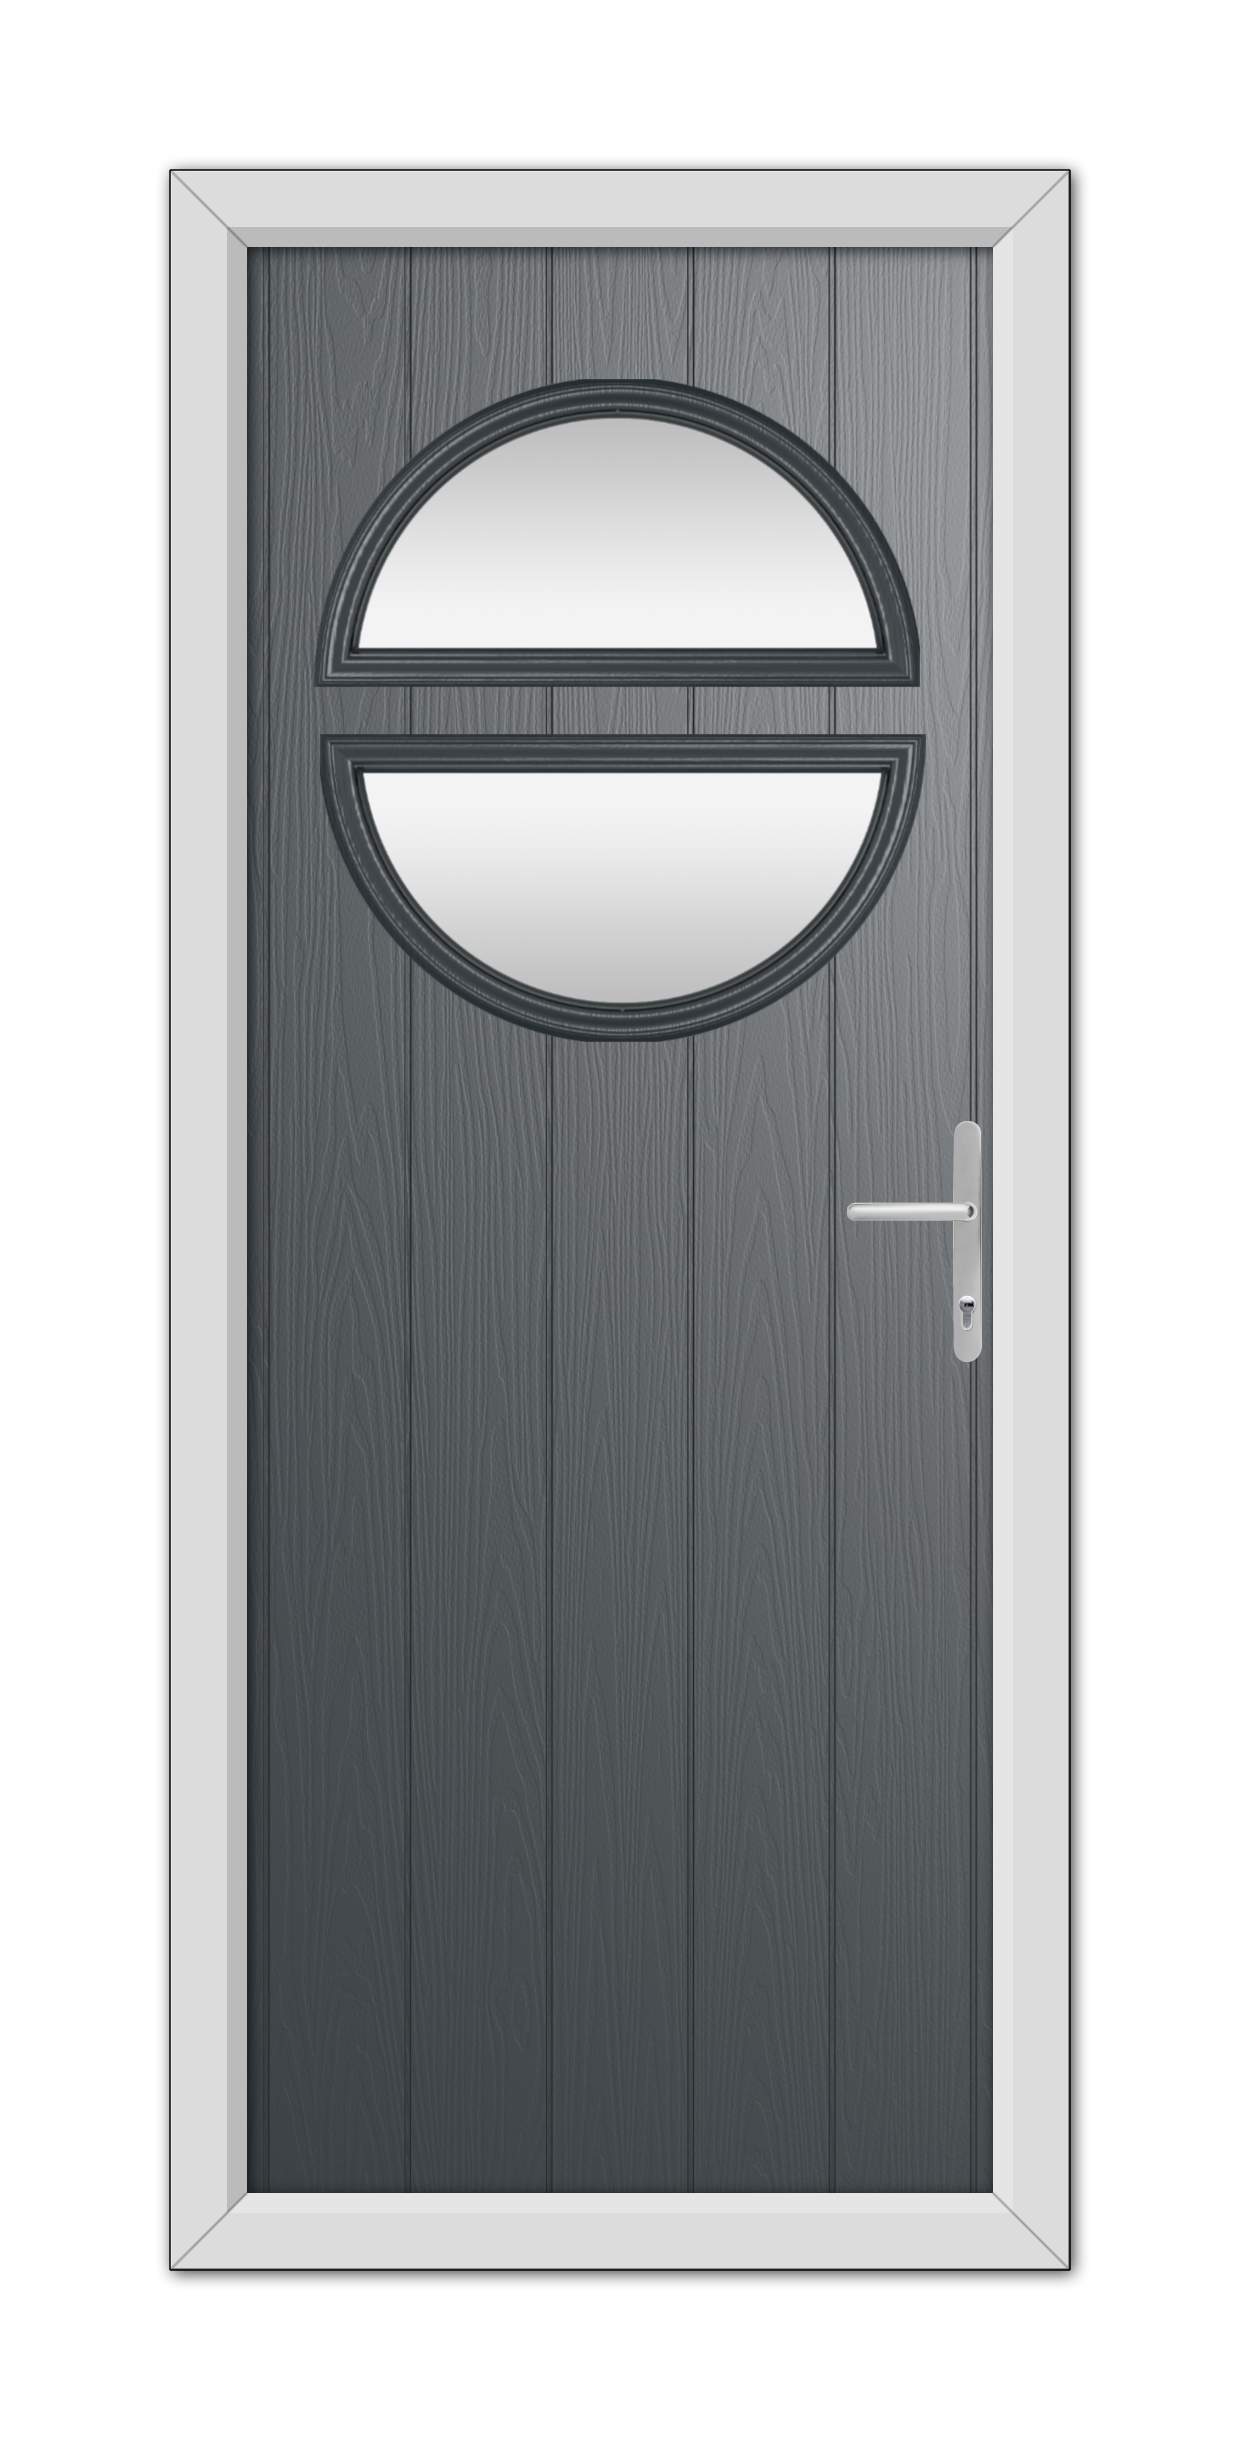 A modern Anthracite Grey Kent Composite Door 48mm Timber Core featuring an oval glass window at the top and a metallic handle on the right side, set within a white frame.